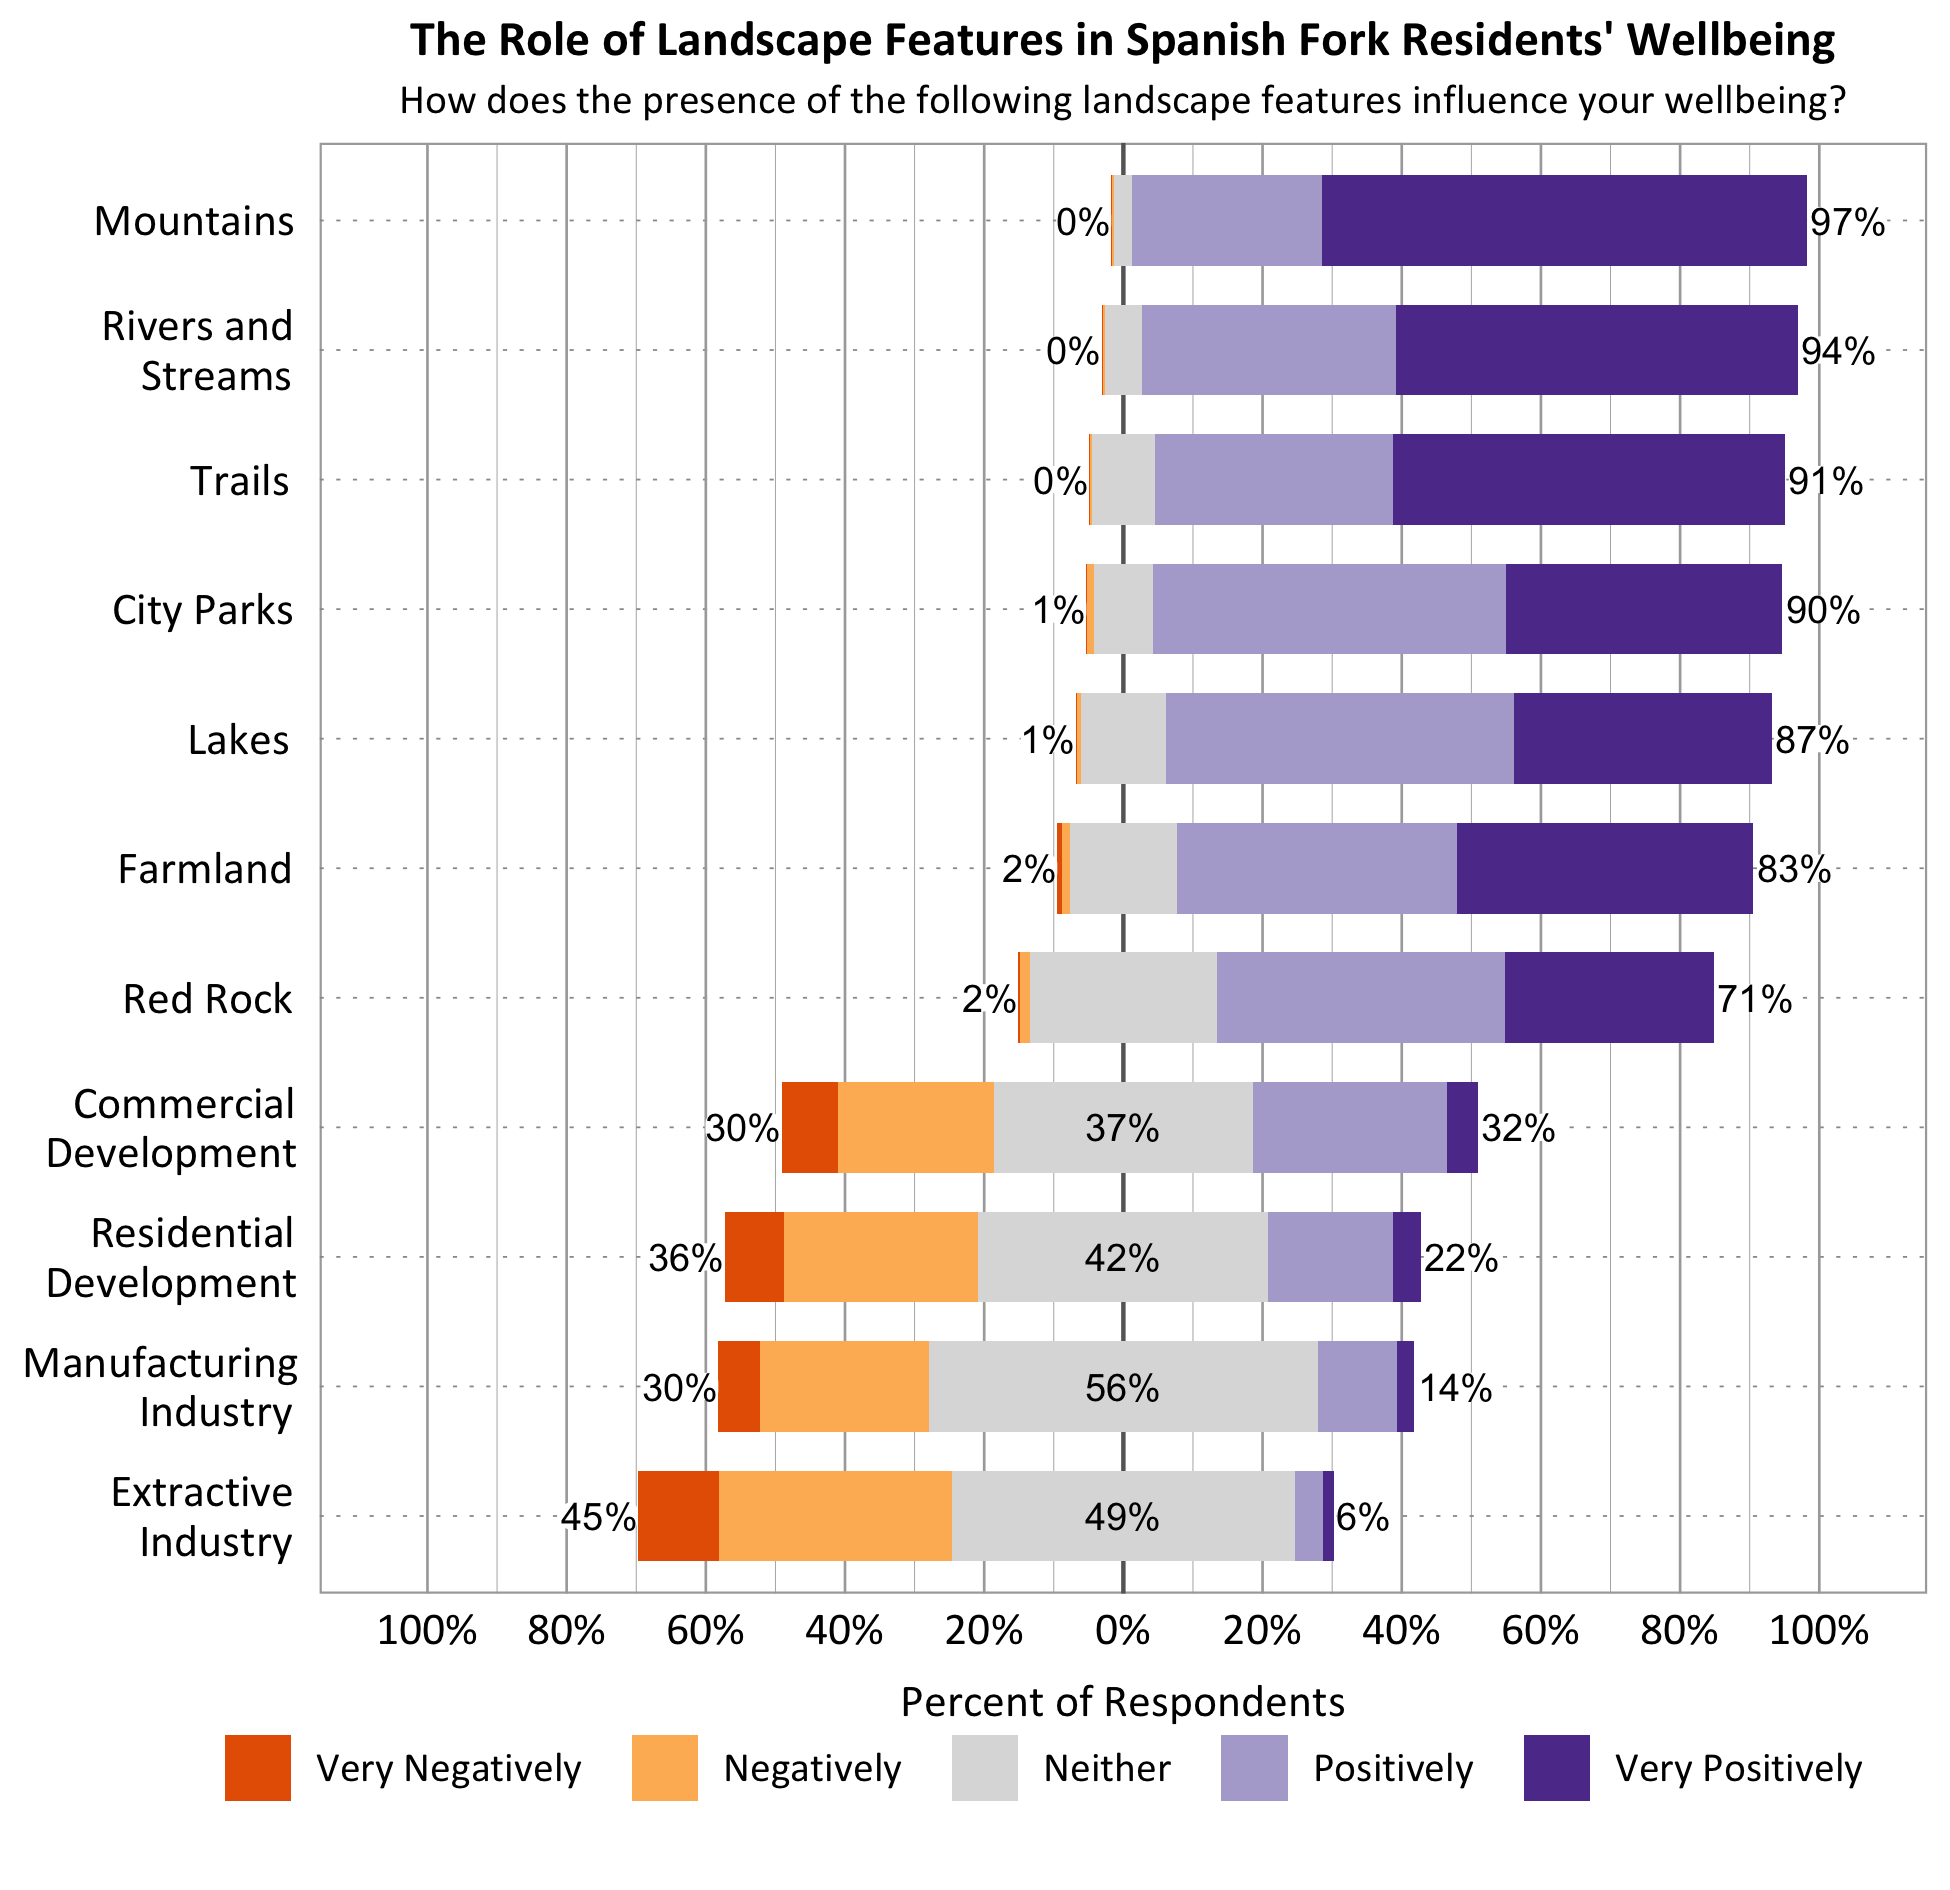 Likert Graph. Title: The Role of Landscape Features in Spanish Fork Residents' Wellbeing. Subtitle: How does the presence of the following landscape features influence your wellbeing? Feature: Mountains - 0% of respondents indicated very negatively or negatively, 3% indicated neither, 97% indicated positively or very positively; Feature: Rivers and Streams - 0% of respondents indicated very negatively or negatively, 6% indicated neither, 94% indicated positively or very positively; Feature: Lakes - 1% of respondents indicated very negatively or negatively, 12% indicated neither, 87% indicated positively or very positively; Feature: Trails - 0% of respondents indicated very negatively or negatively, 9% indicated neither, 91% indicated positively or very positively; Feature: City Parks - 1% of respondents indicated very negatively or negatively, 9% indicated neither, 90% indicated positively or very positively; Feature: Red Rock - 2% of respondents indicated very negatively or negatively, 27% indicated neither, 71% indicated positively or very positively; Feature: Farmland – 2% of respondents indicated very negatively or negatively, 15% indicated neither, 83% indicated positively or very positively; Commercial Development - 30% of respondents indicated very negatively or negatively, 37% indicated neither, 32% indicated positively or very positively; Feature: Residential Development - 36% of respondents indicated very negatively or negatively, 42% indicated neither, 22% indicated positively or very positively; Feature: Feature: Manufacturing Industry - 30% of respondents indicated very negatively or negatively, 56% indicated neither, 14% indicated positively or very positively; Feature: Extractive Industry - 45% of respondents indicated very negatively or negatively, 49% indicated neither, 6% indicated positively or very positively.